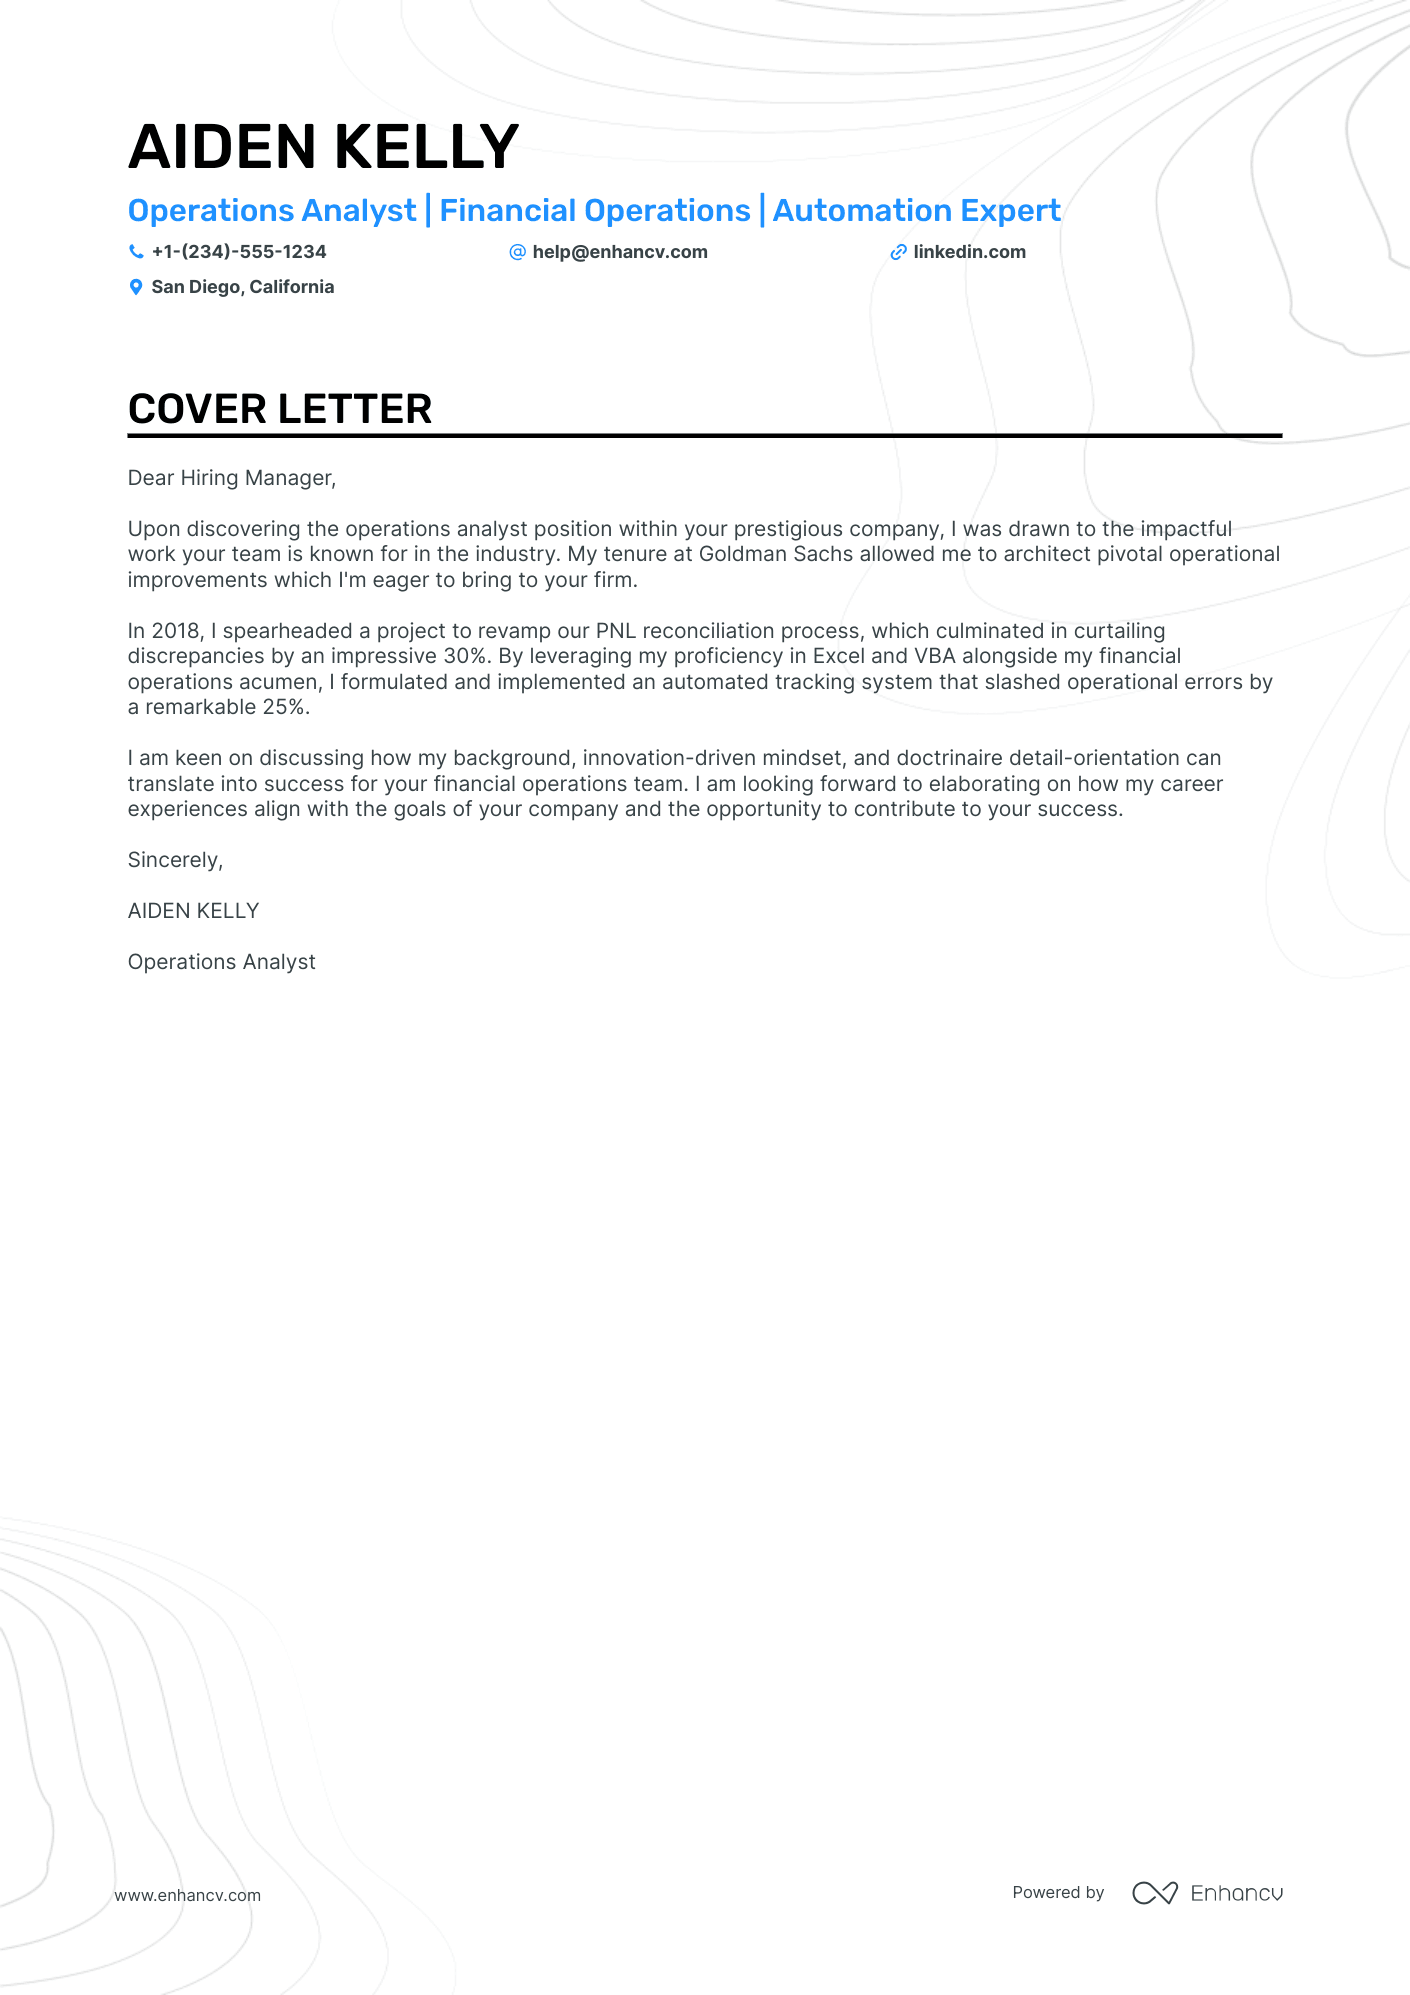 Operations Analyst cover letter